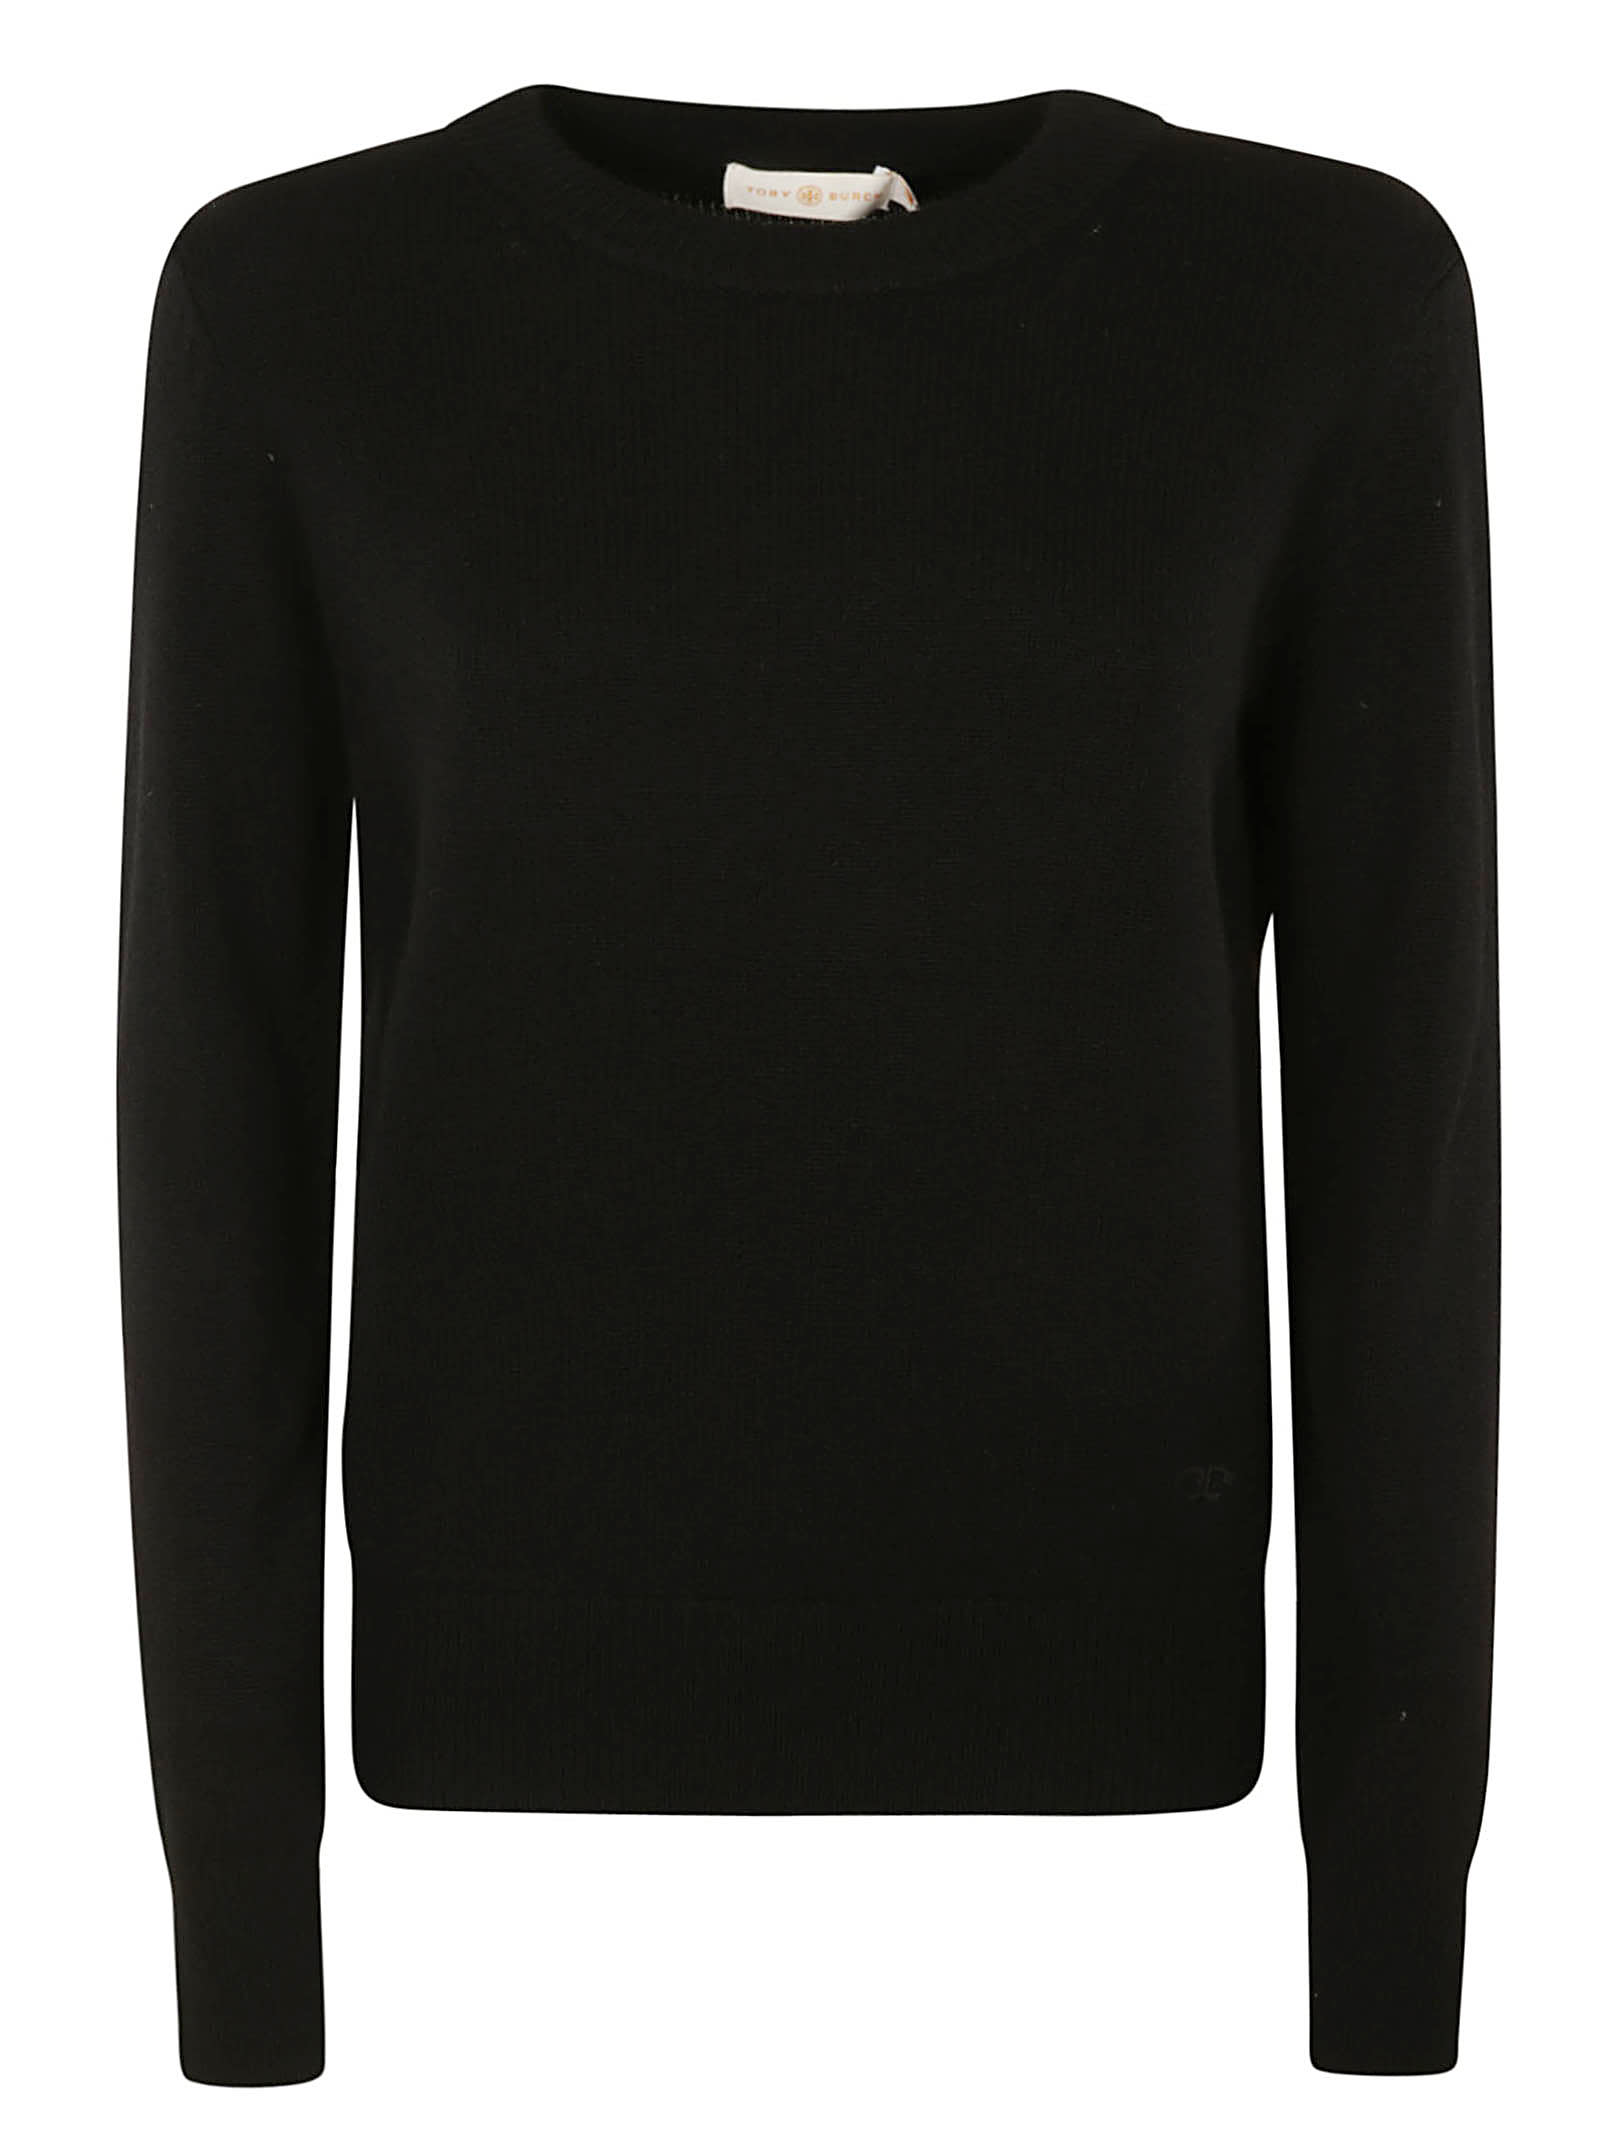 Tory Burch Cashmere Sequined Sweater